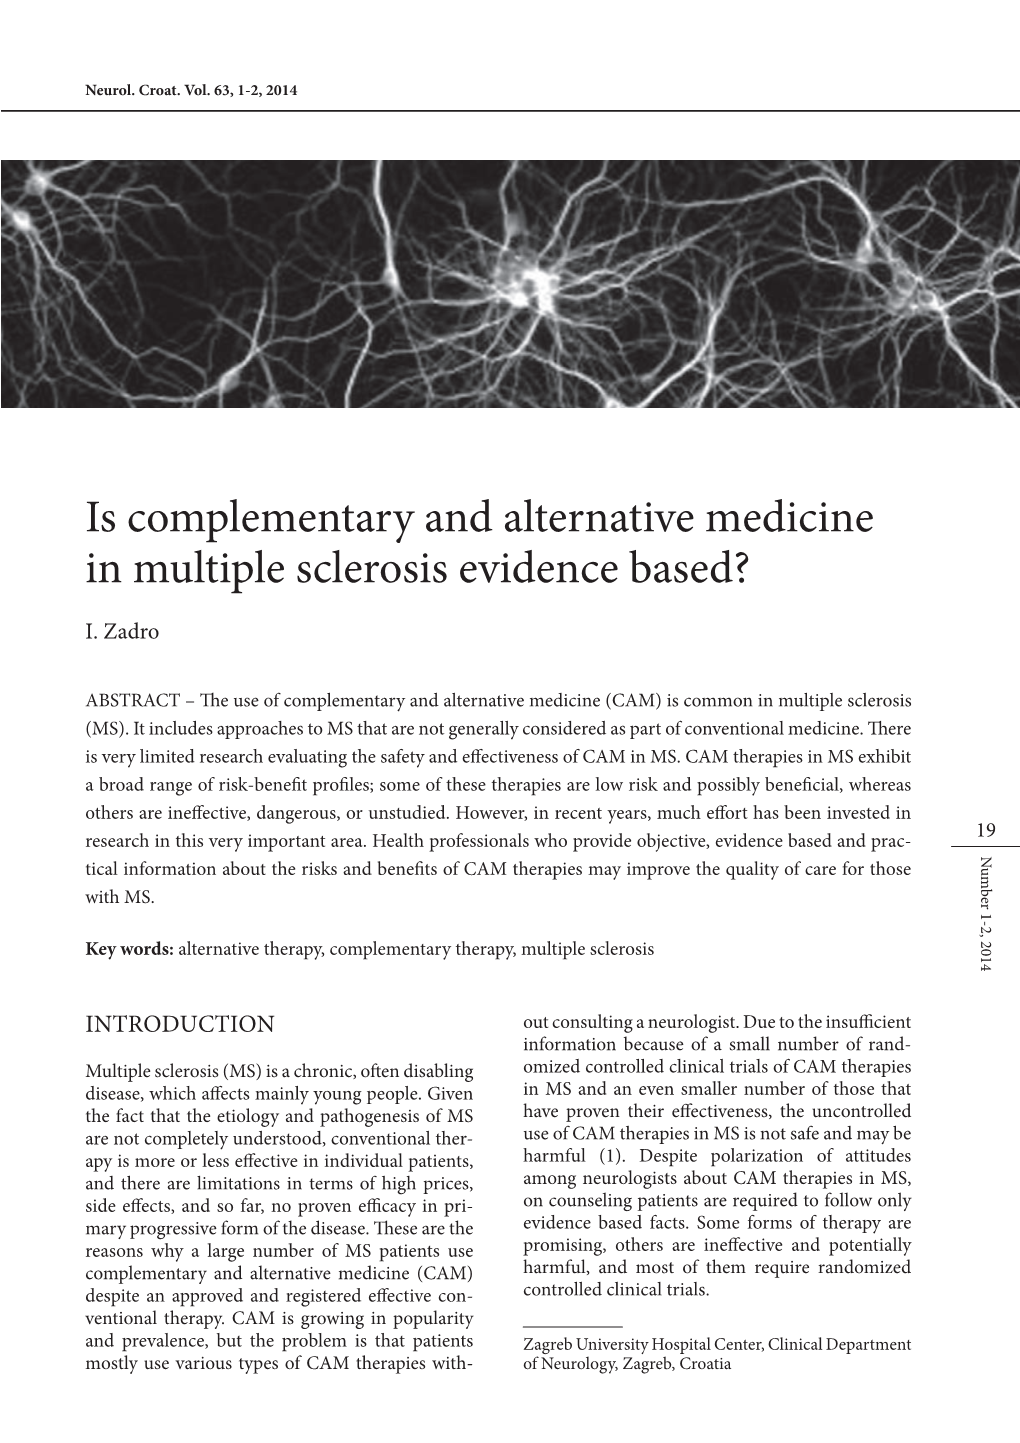 Is Complementary and Alternative Medicine in Multiple Sclerosis Evidence Based?